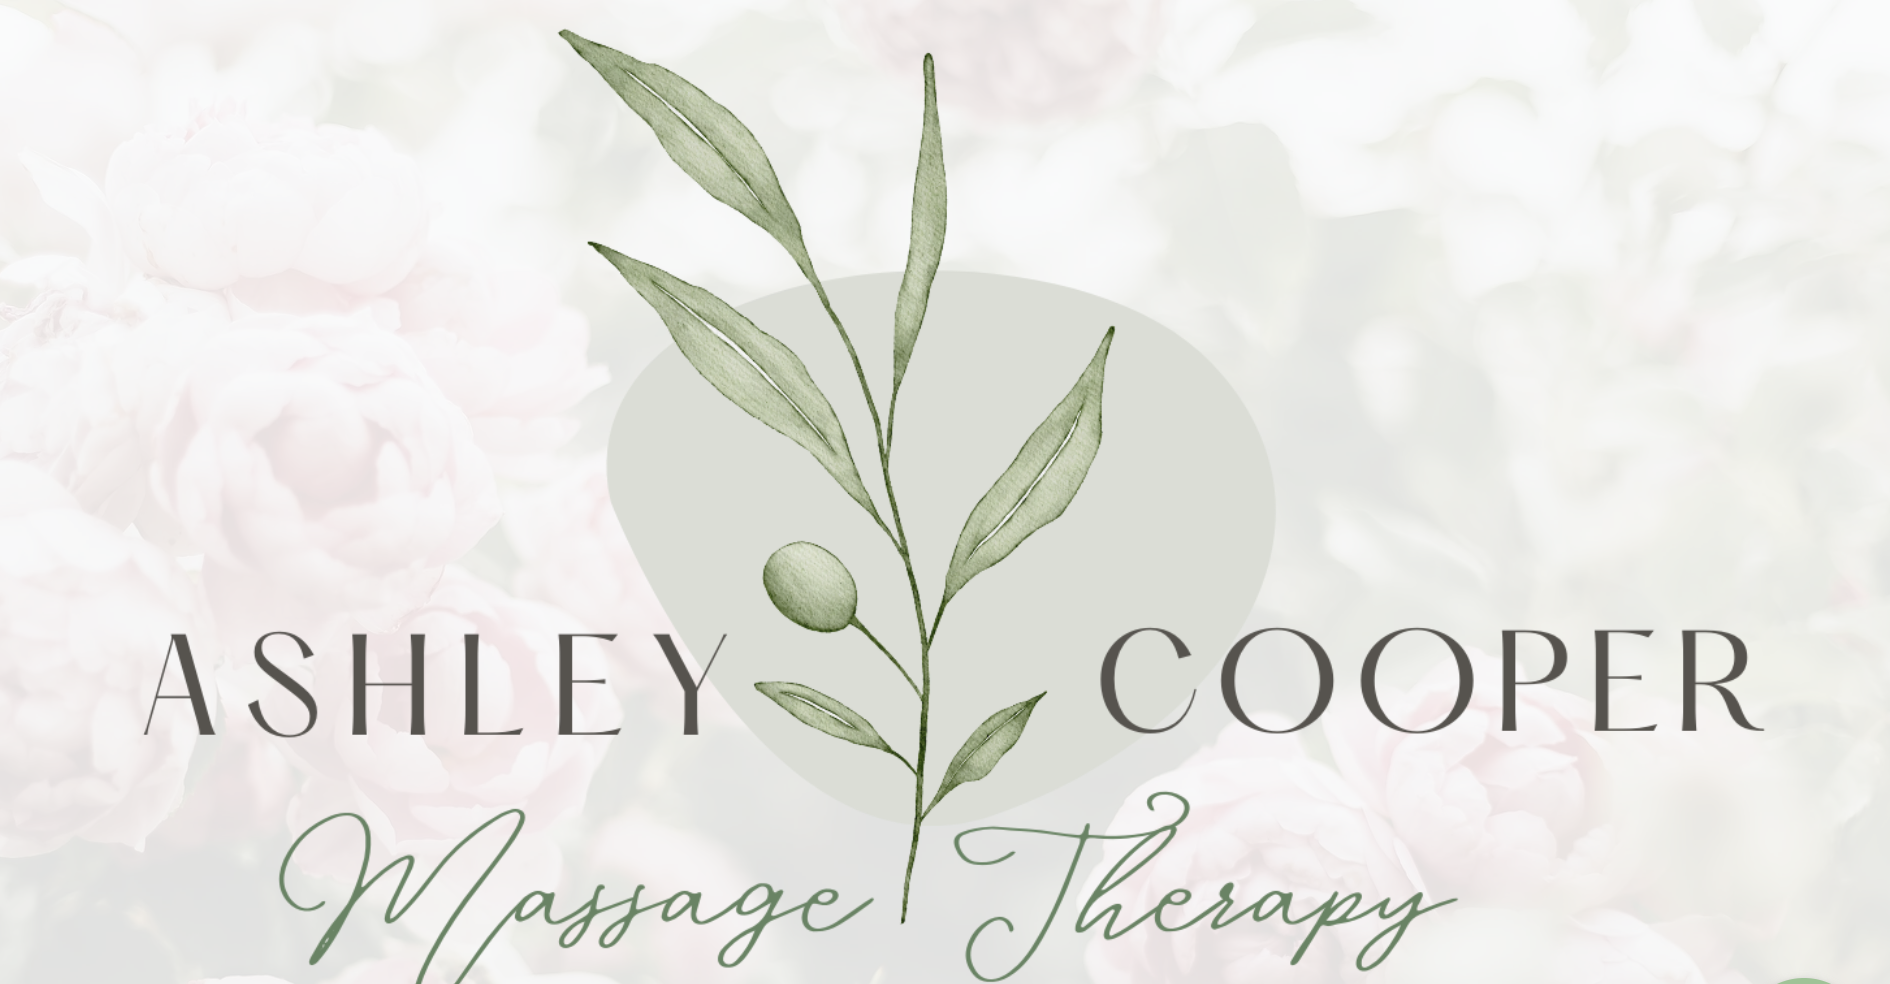 Ashley Cooper Massage Therapy